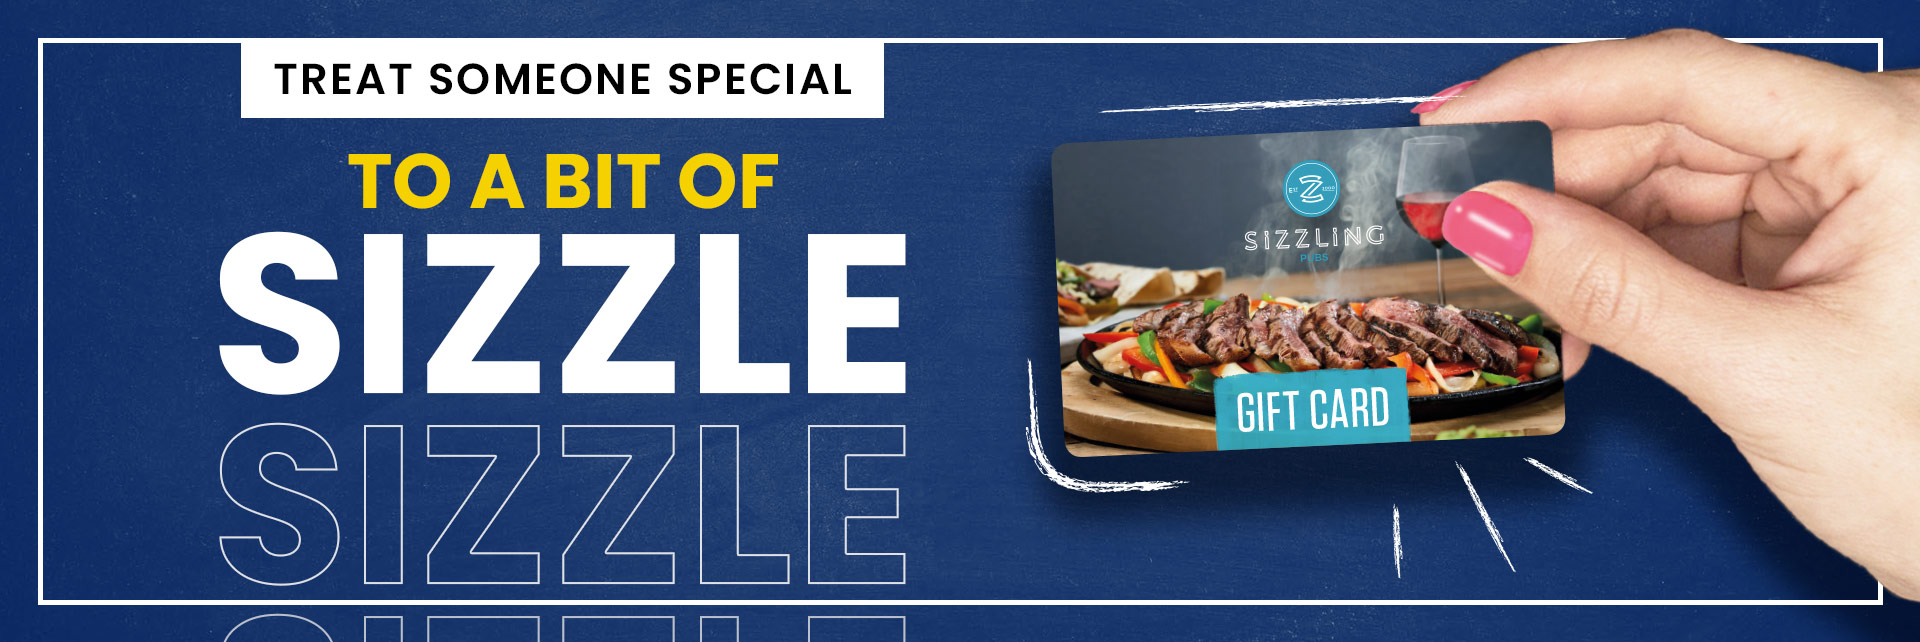 Sizzling Pubs Gift Card at The Ram Inn in Nottingham